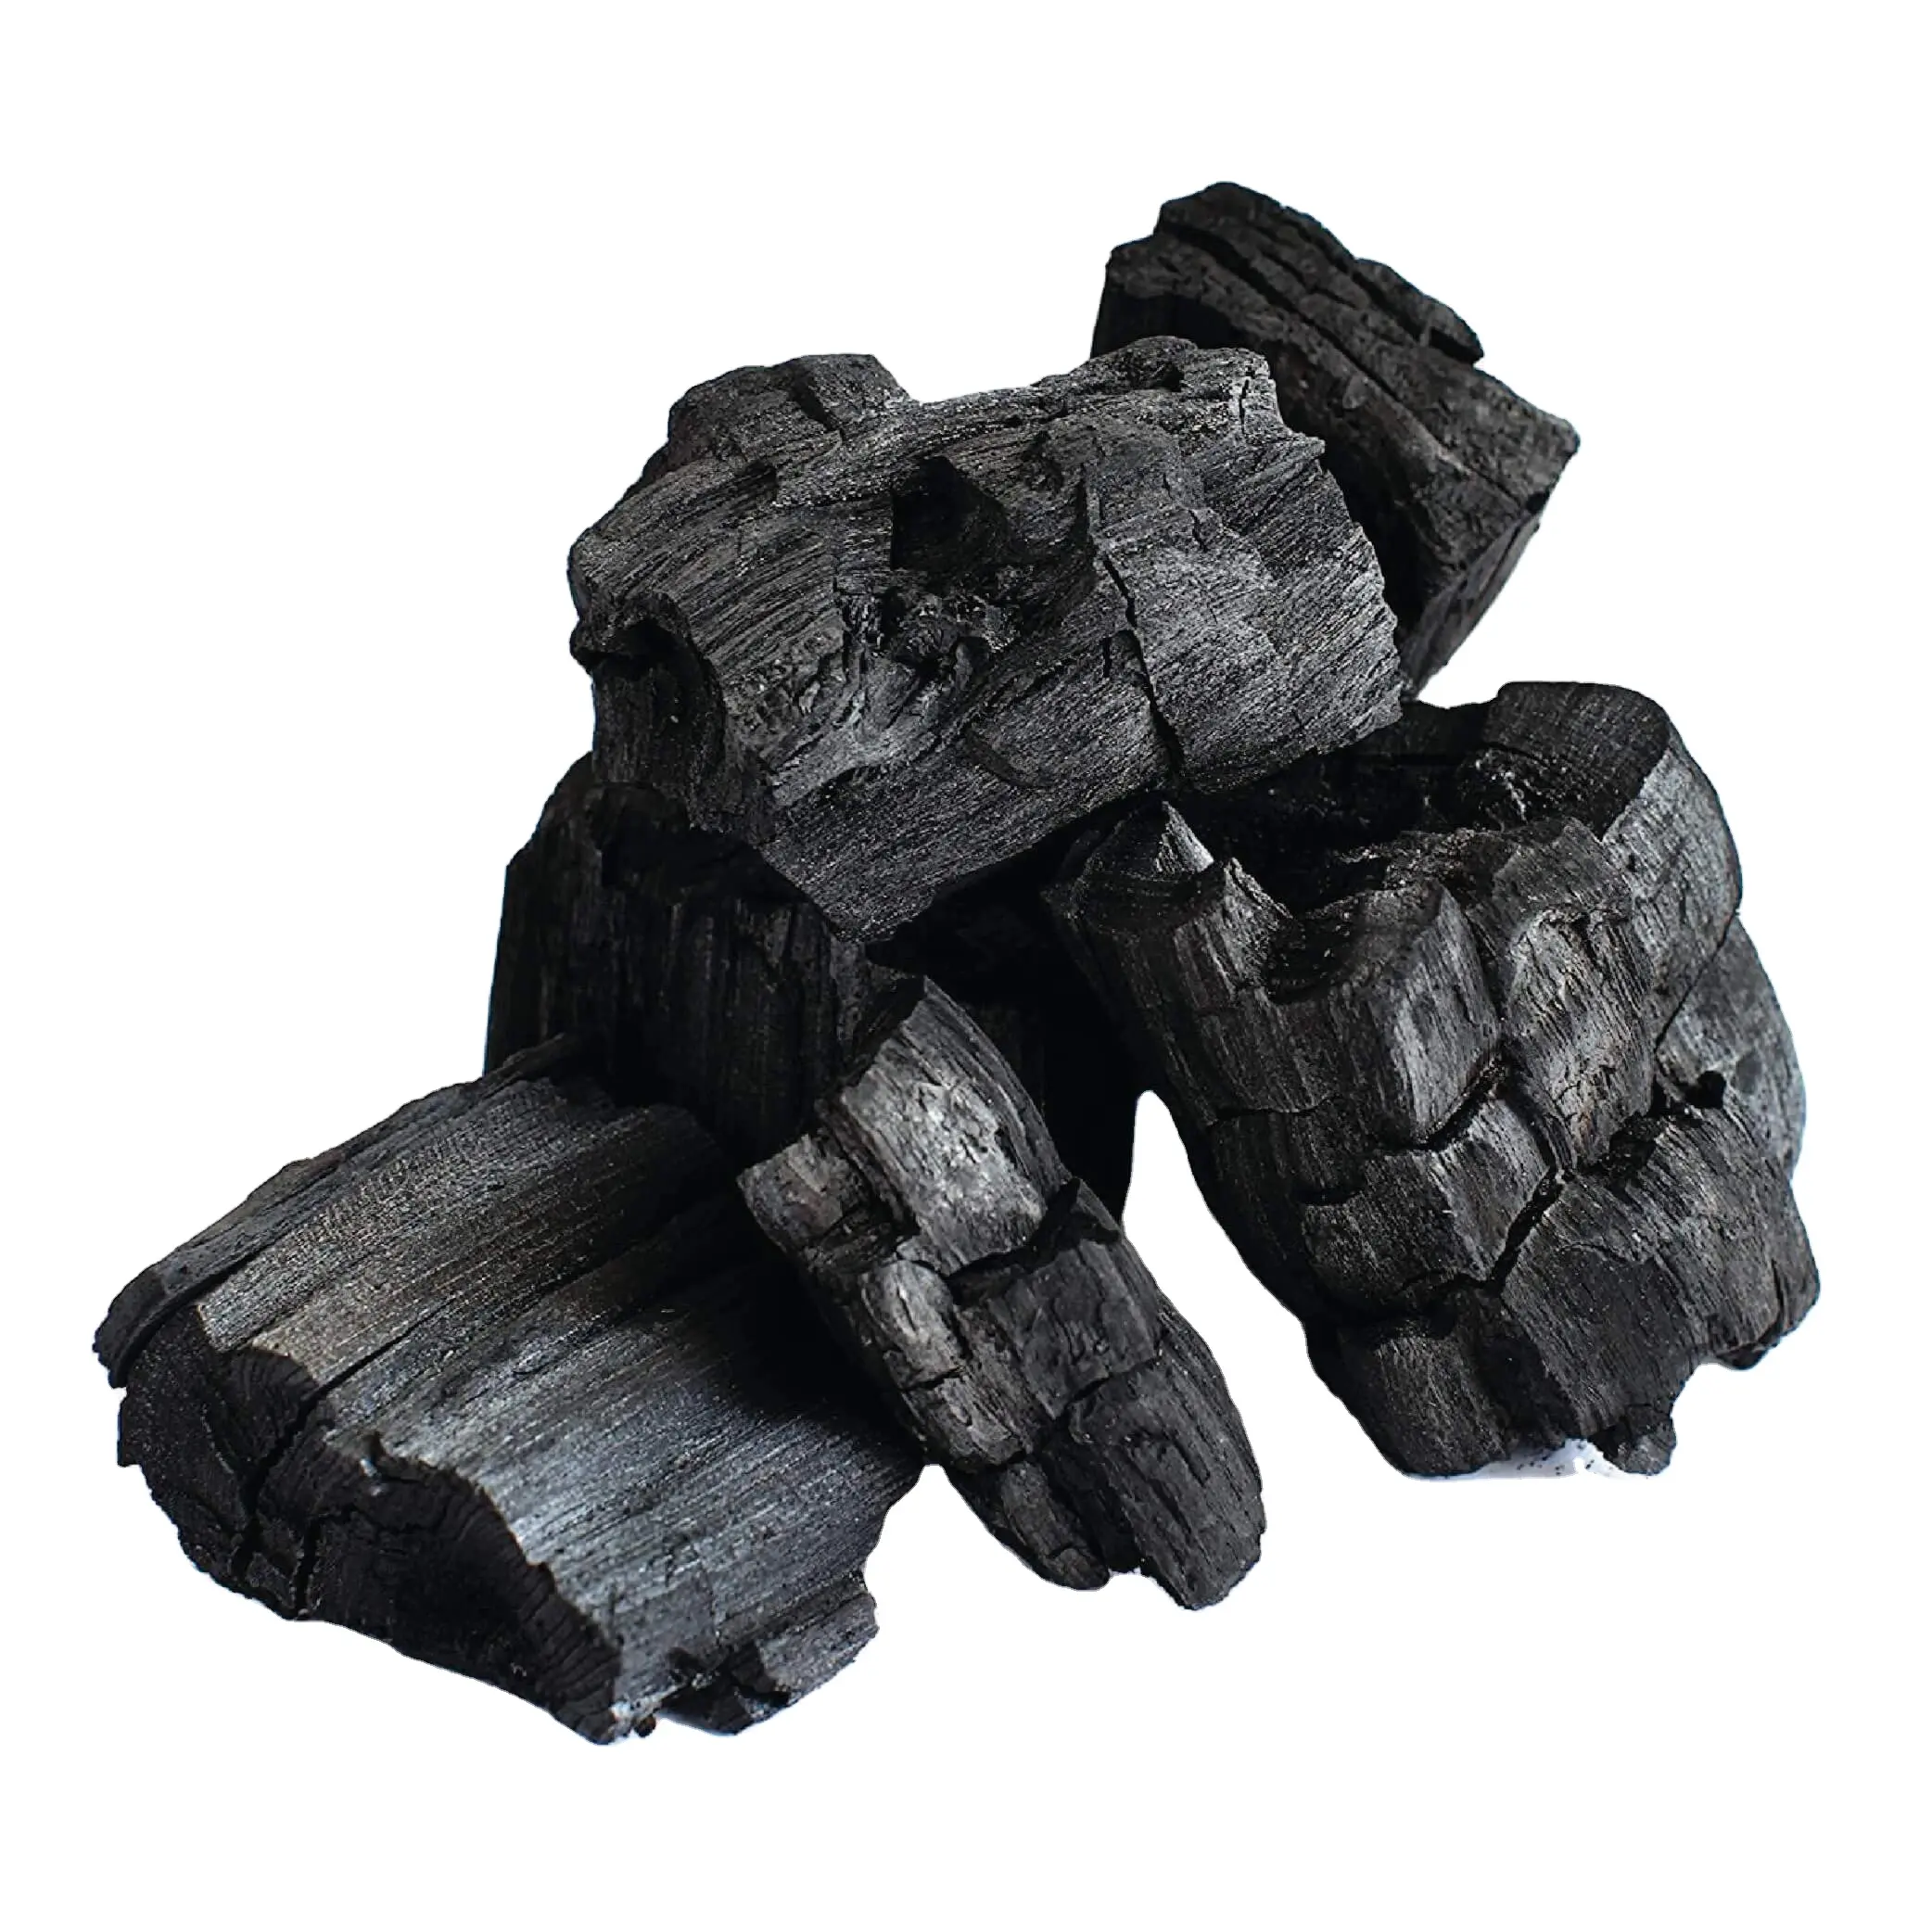 Long Shape Bbq Charcoal / Briquette sawdust charcoal / Best smokeless bbq Charcoal for sale in good price